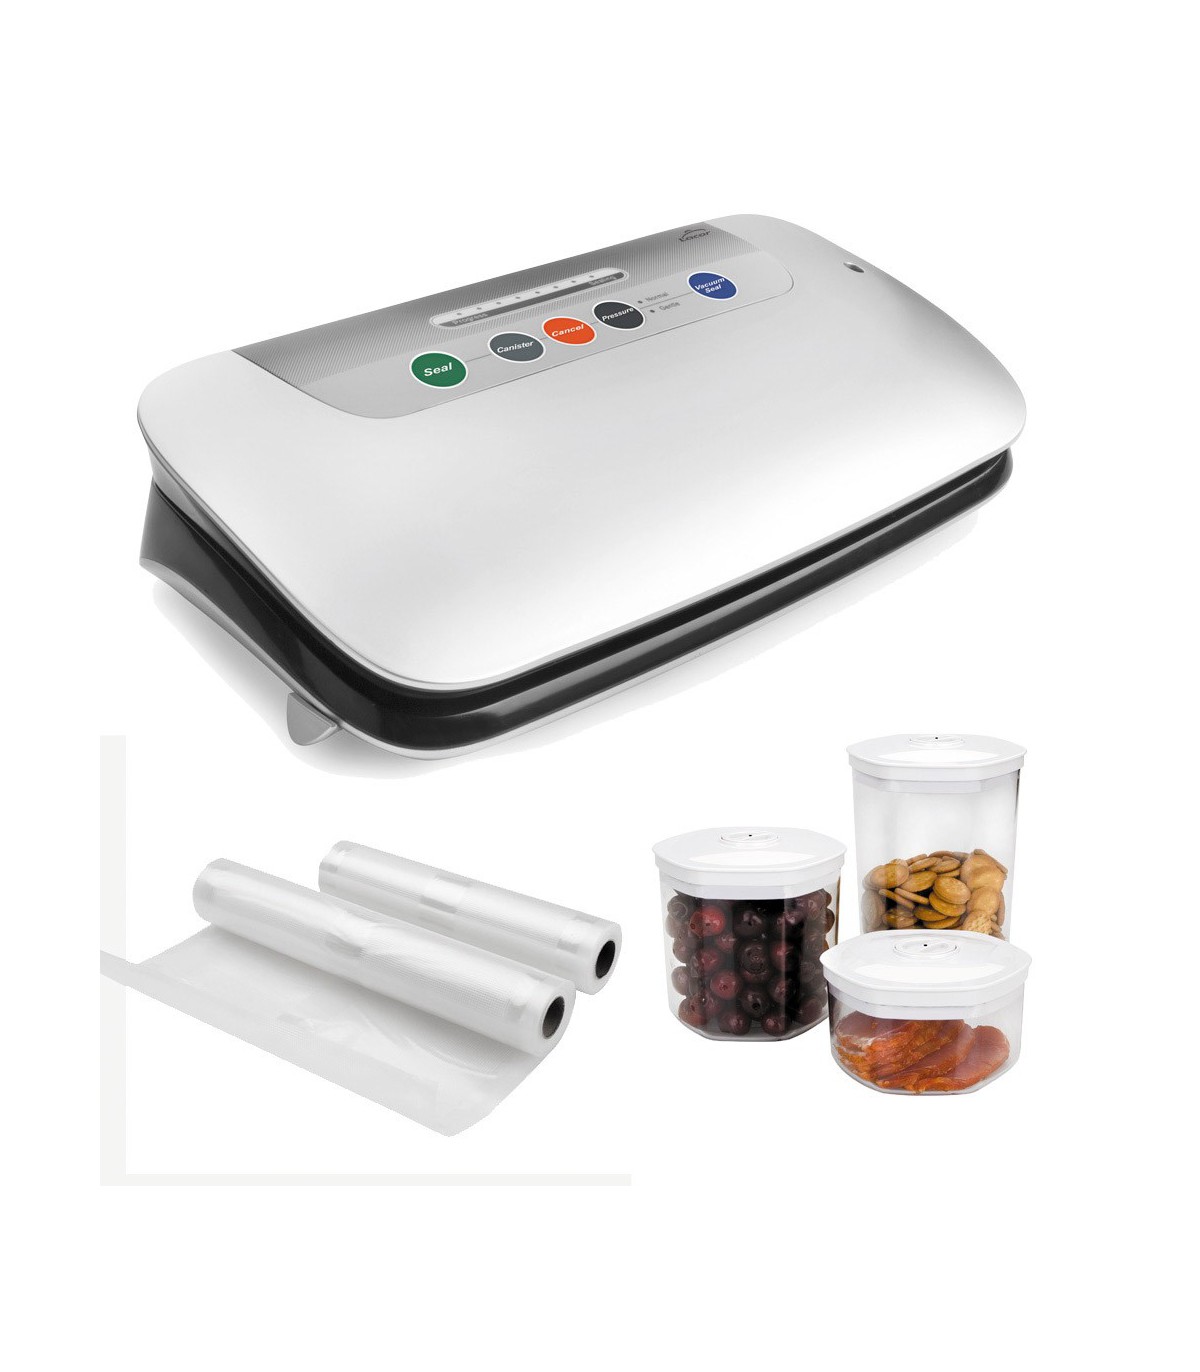 Pack machine sous vide alimentaire 🍏